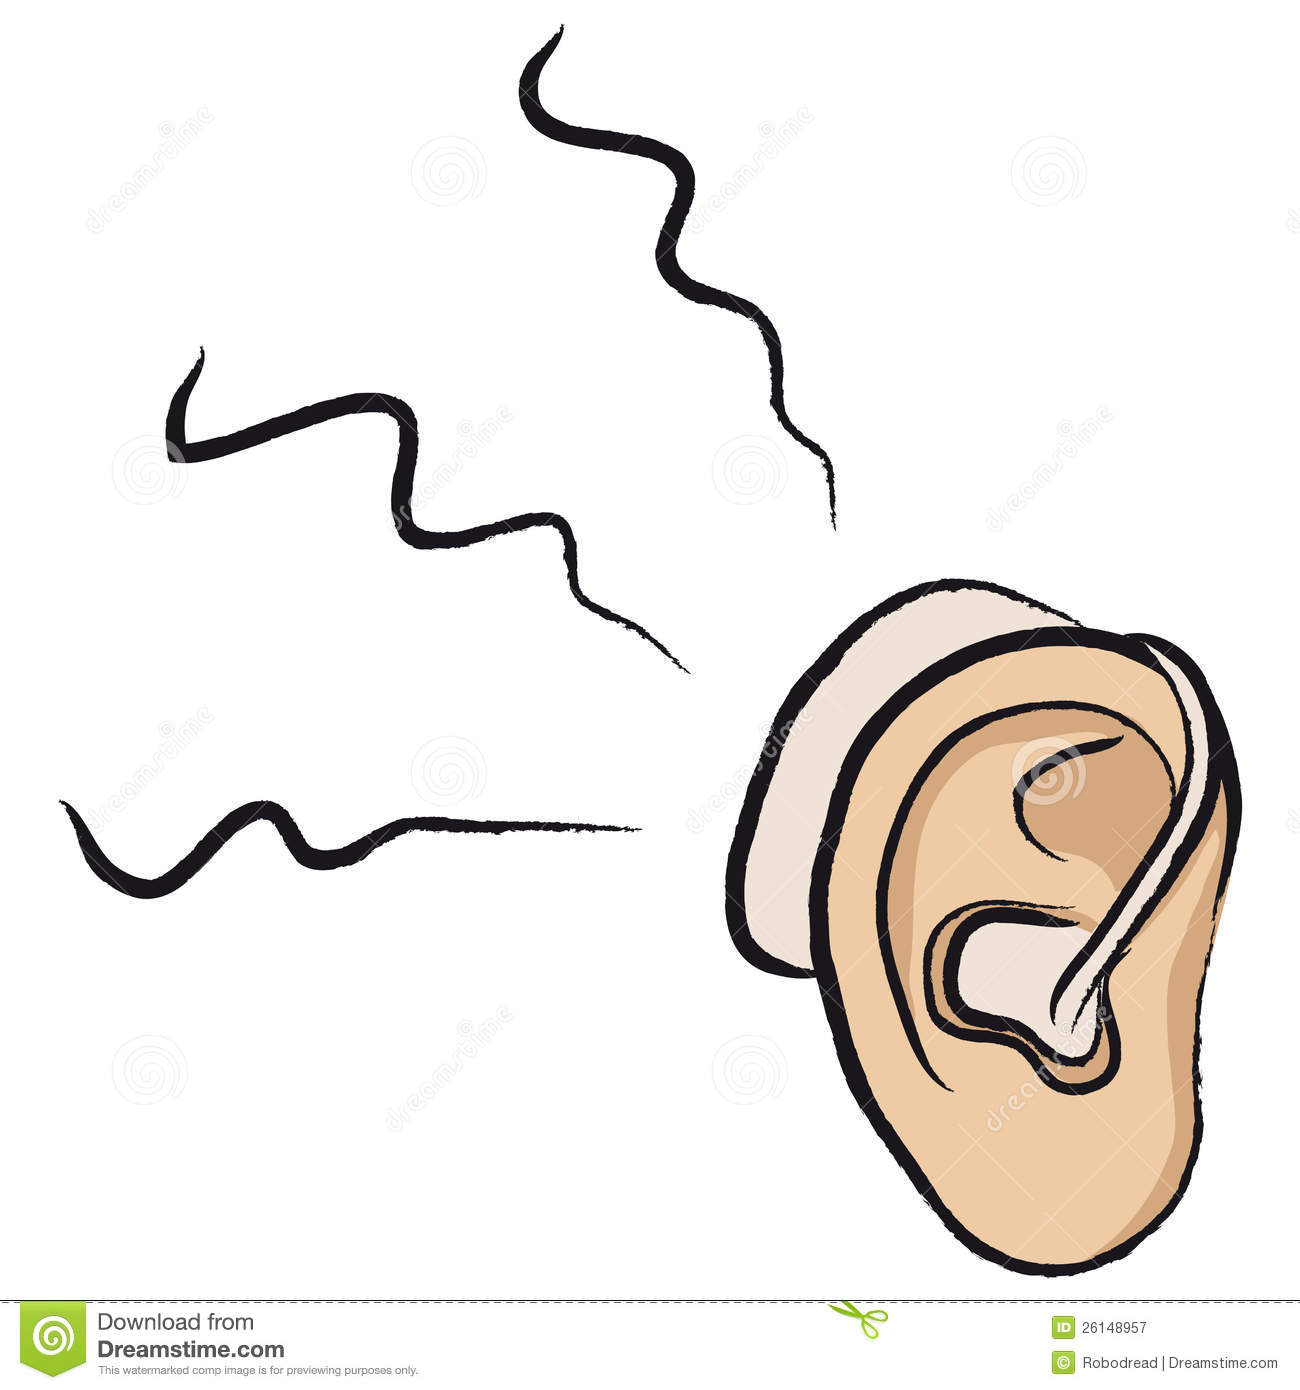 Hearing Aid Royalty Free Stock Photography   Image  26148957